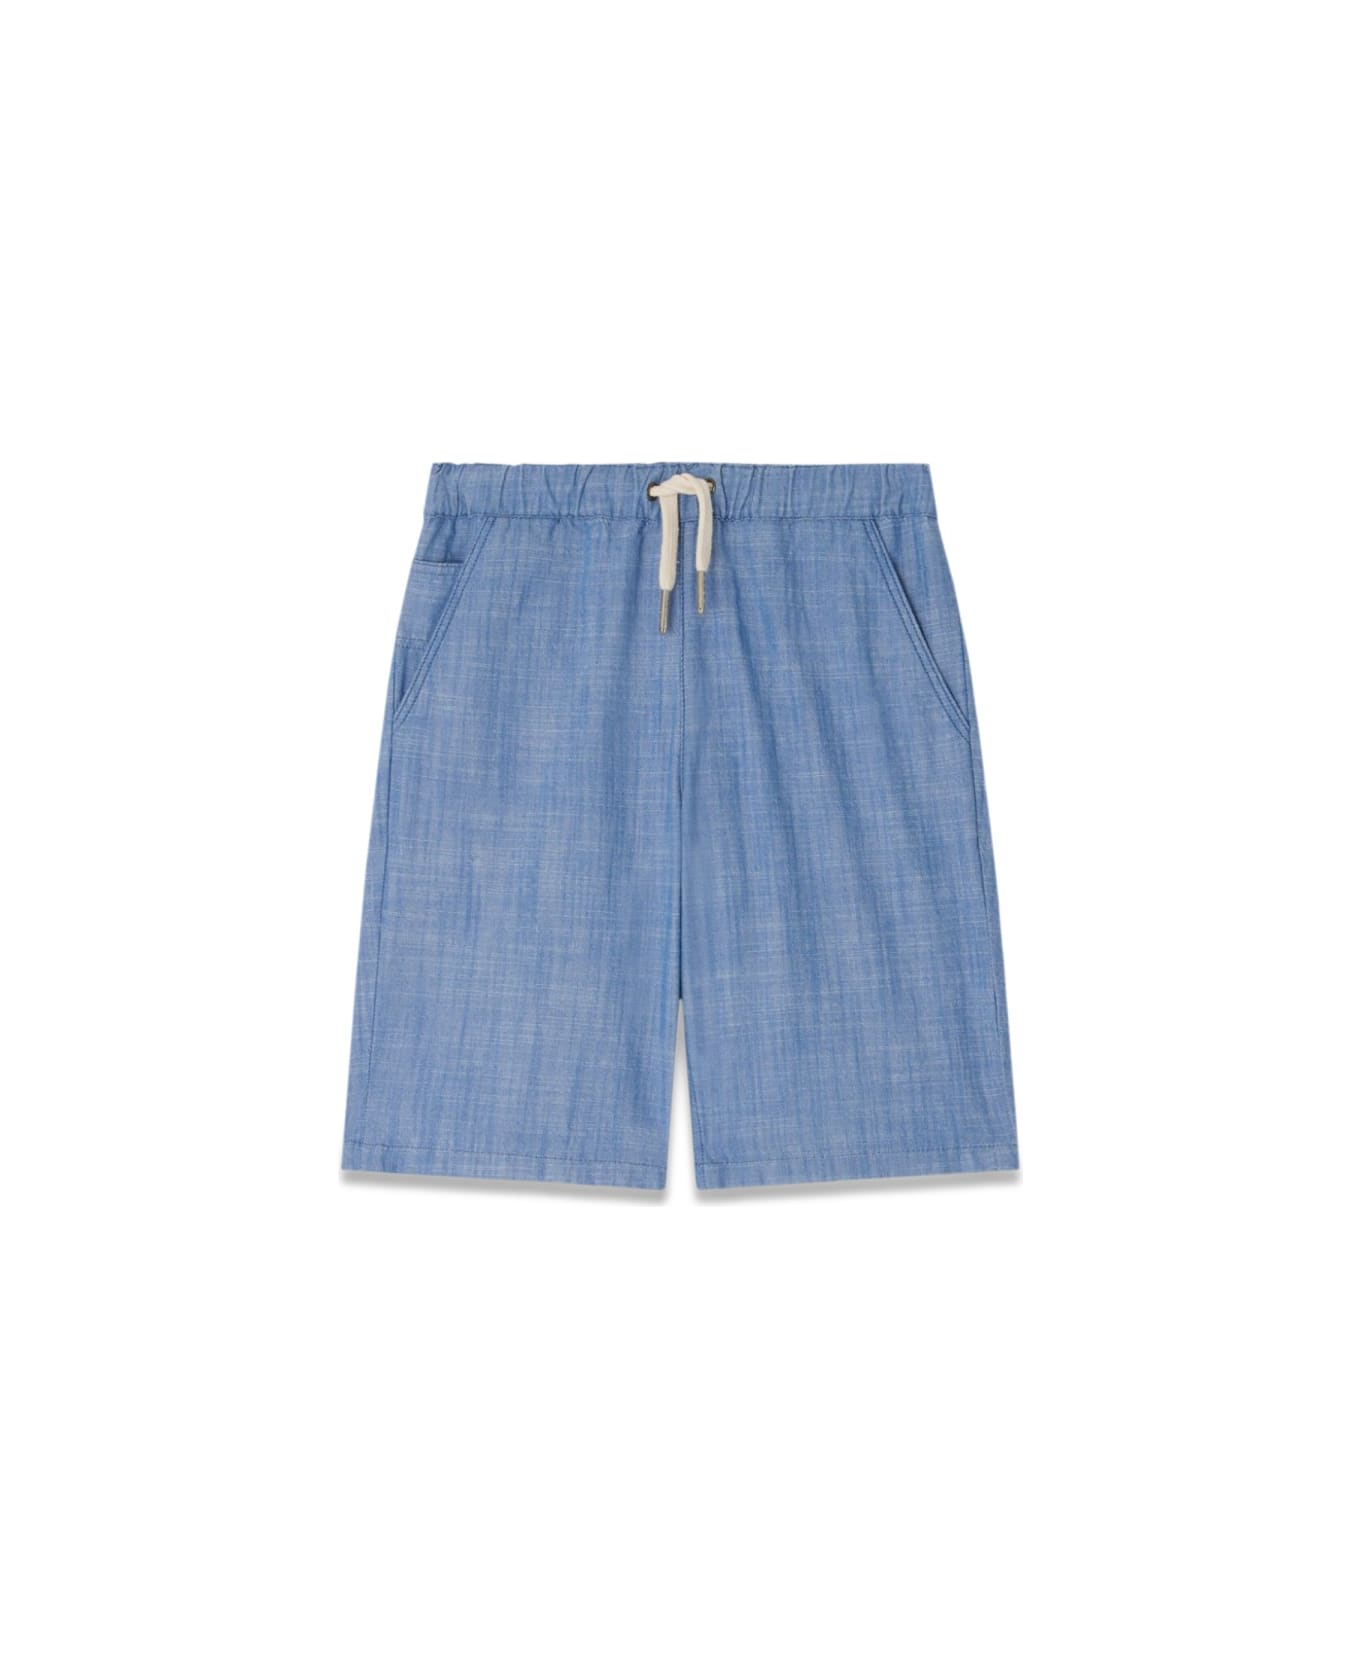 Bonpoint Short Conway - BLUE